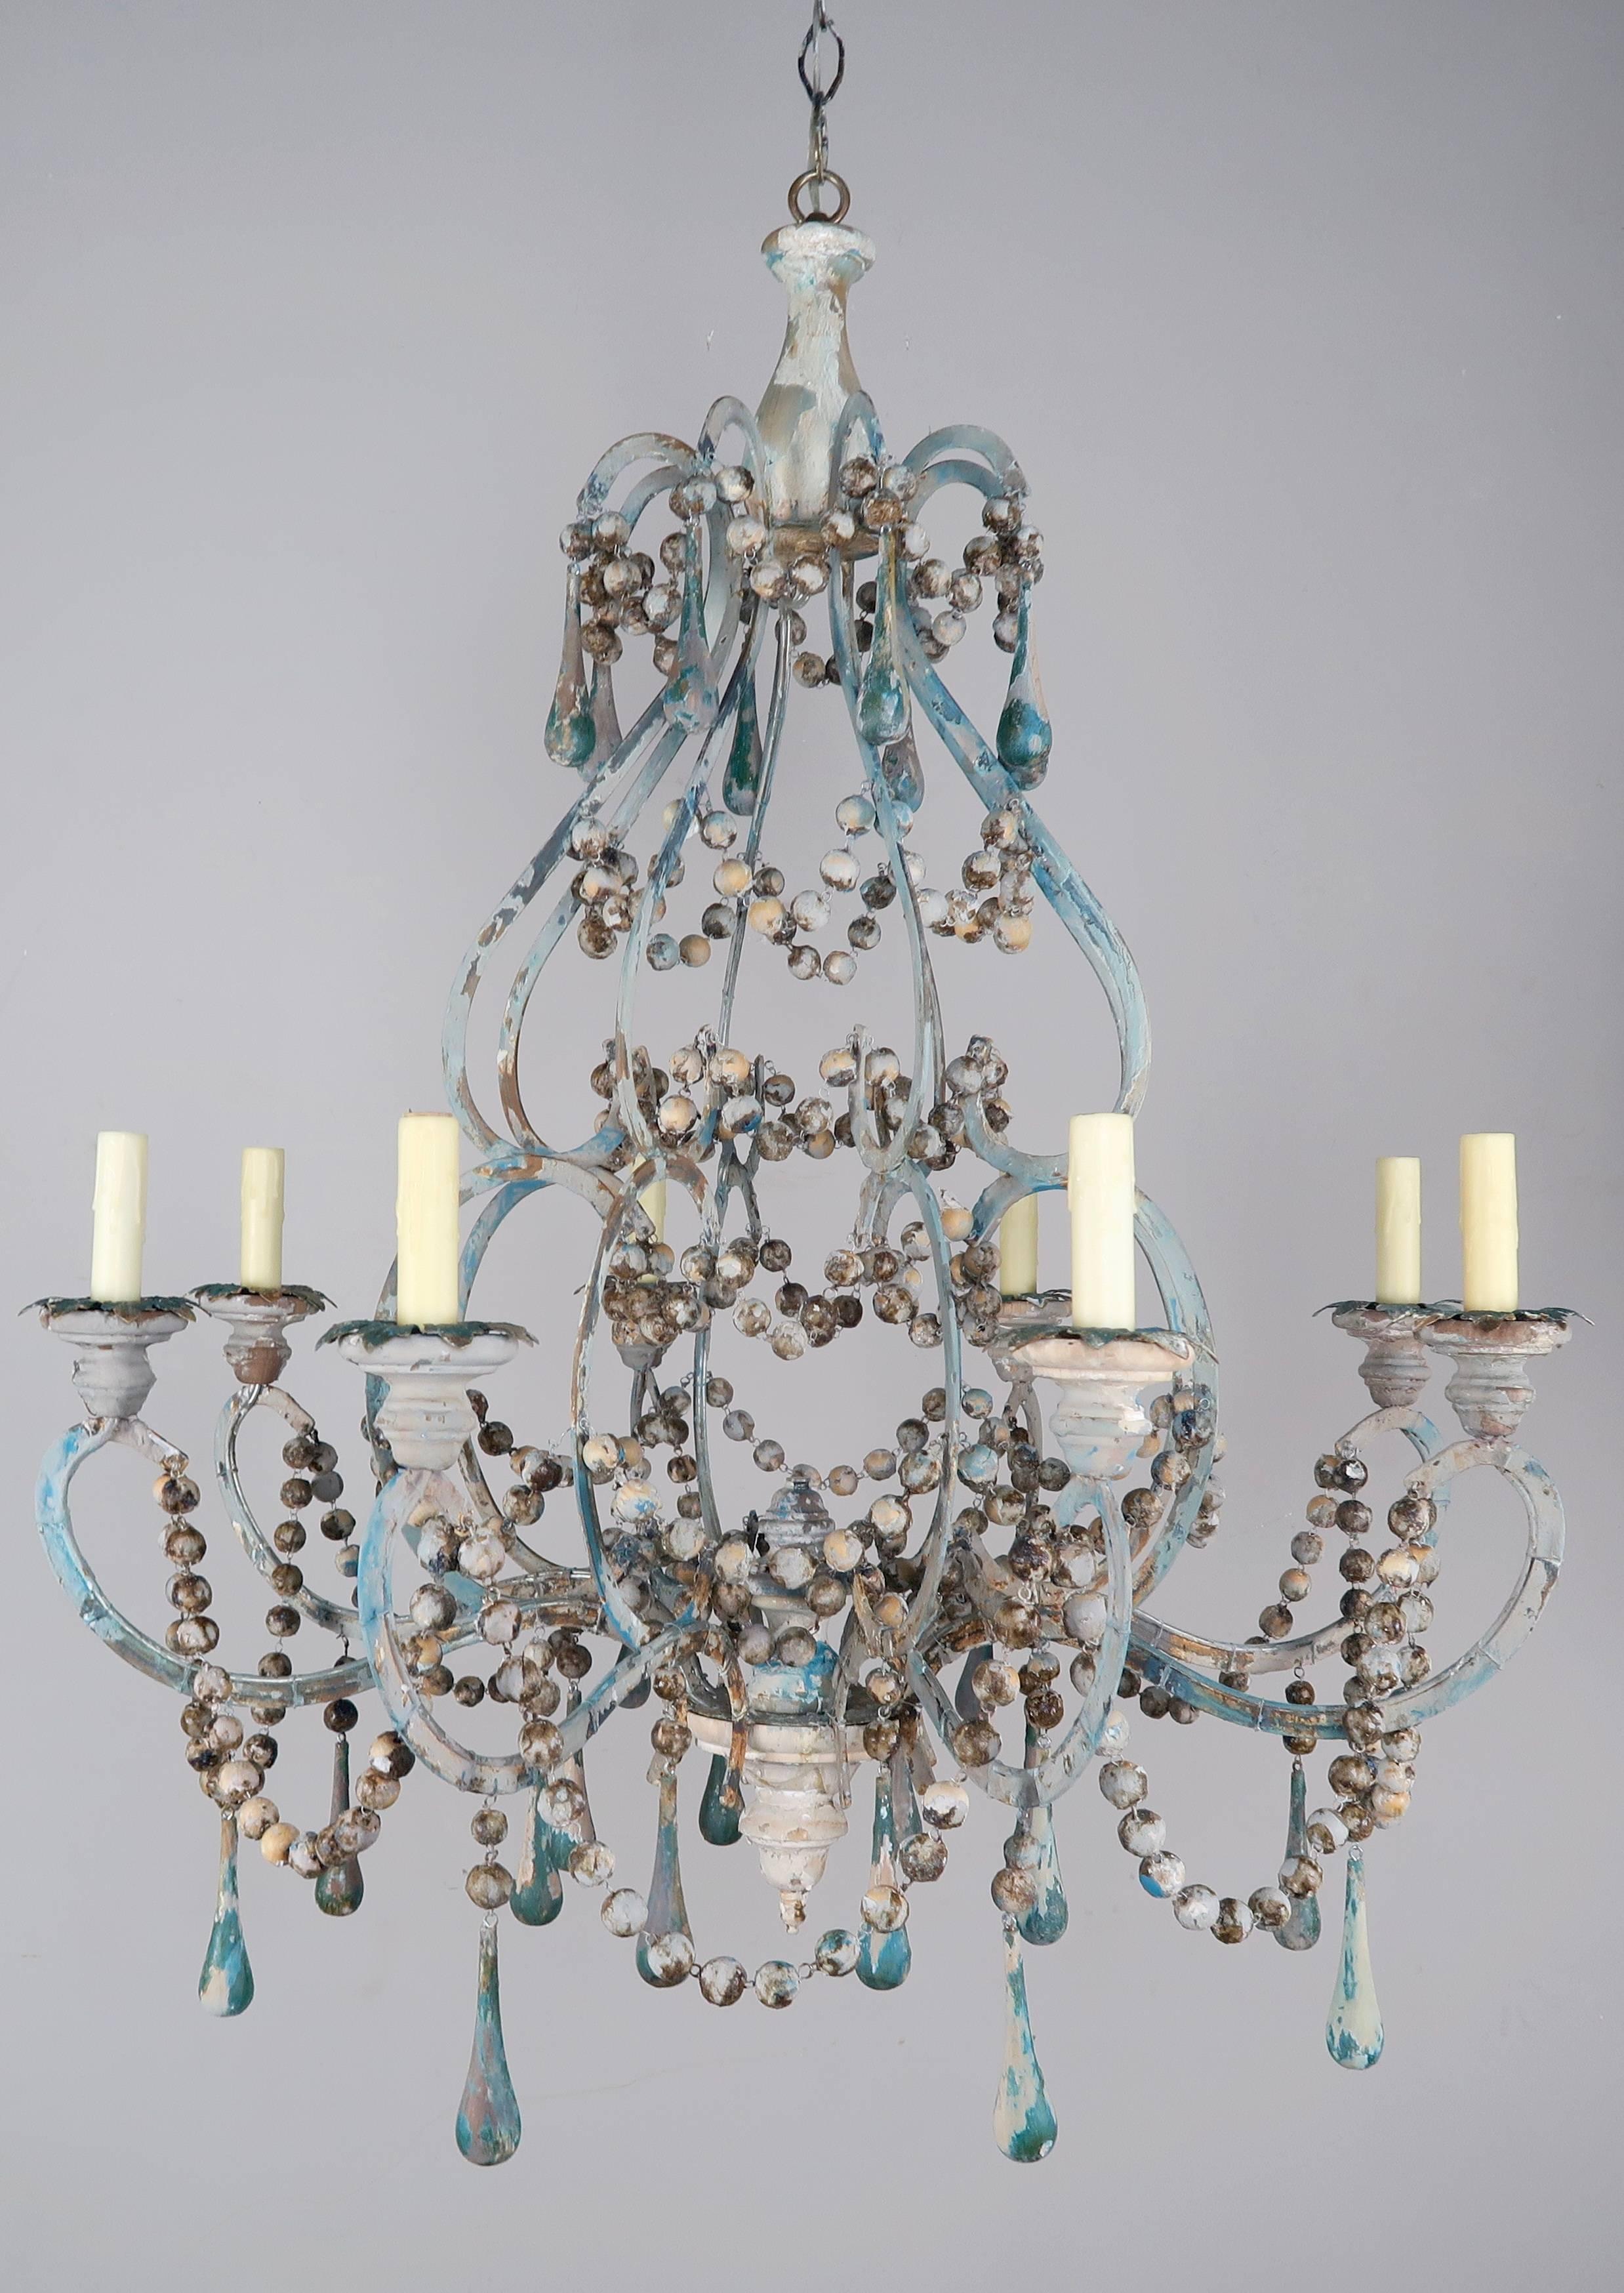 Pair of eight light wood beaded and metal chandeliers with blue tear drops and wooden bobeches with drip wax candle covers. The fixtures have been newly wired with chain and canopy and are ready to install.